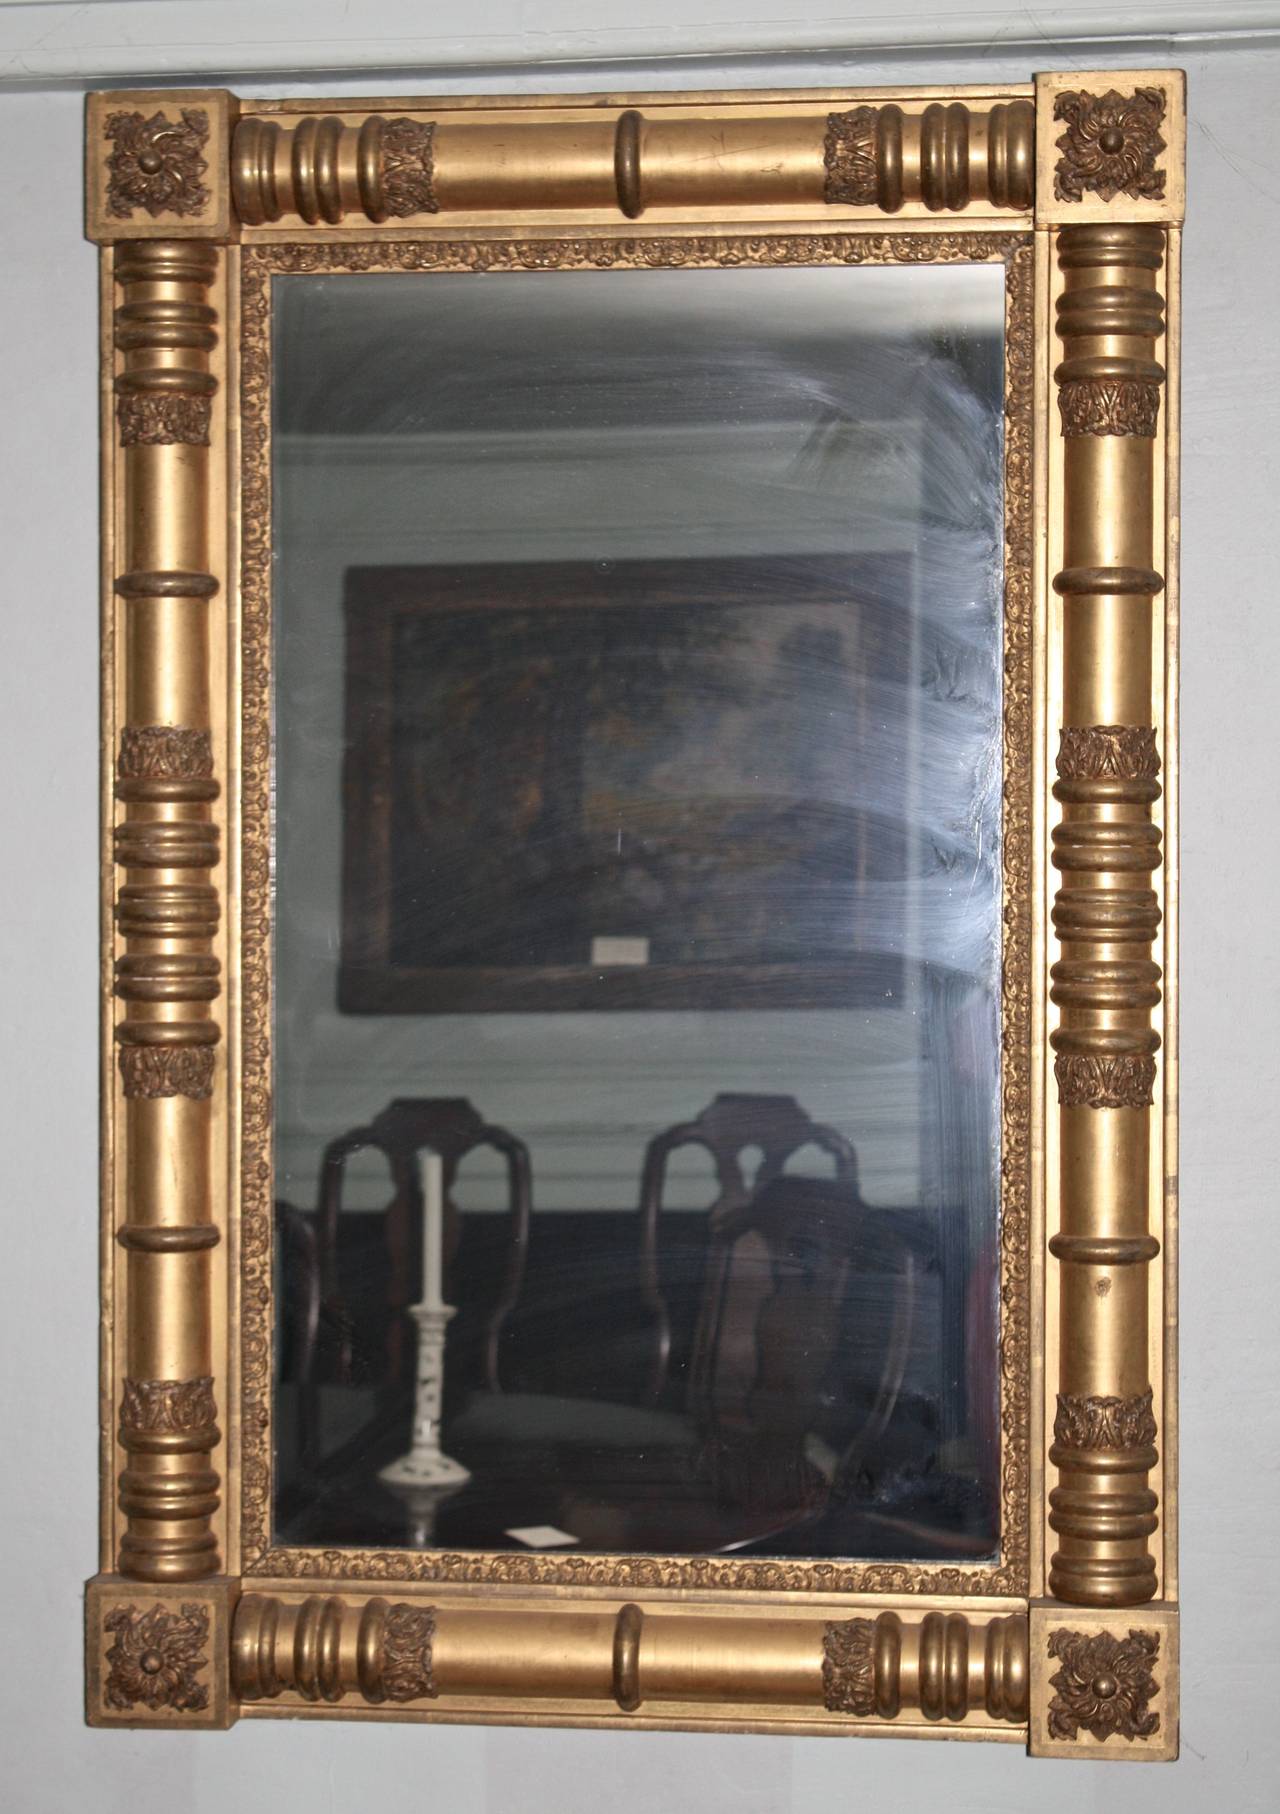 A massive giltwood pier mirror with its original gold leaf surface applied on very complex turnings and carvings.  The original mirror plate has been replaced for better  visibility.  Though firmly attributed by familial narrative to the shop of